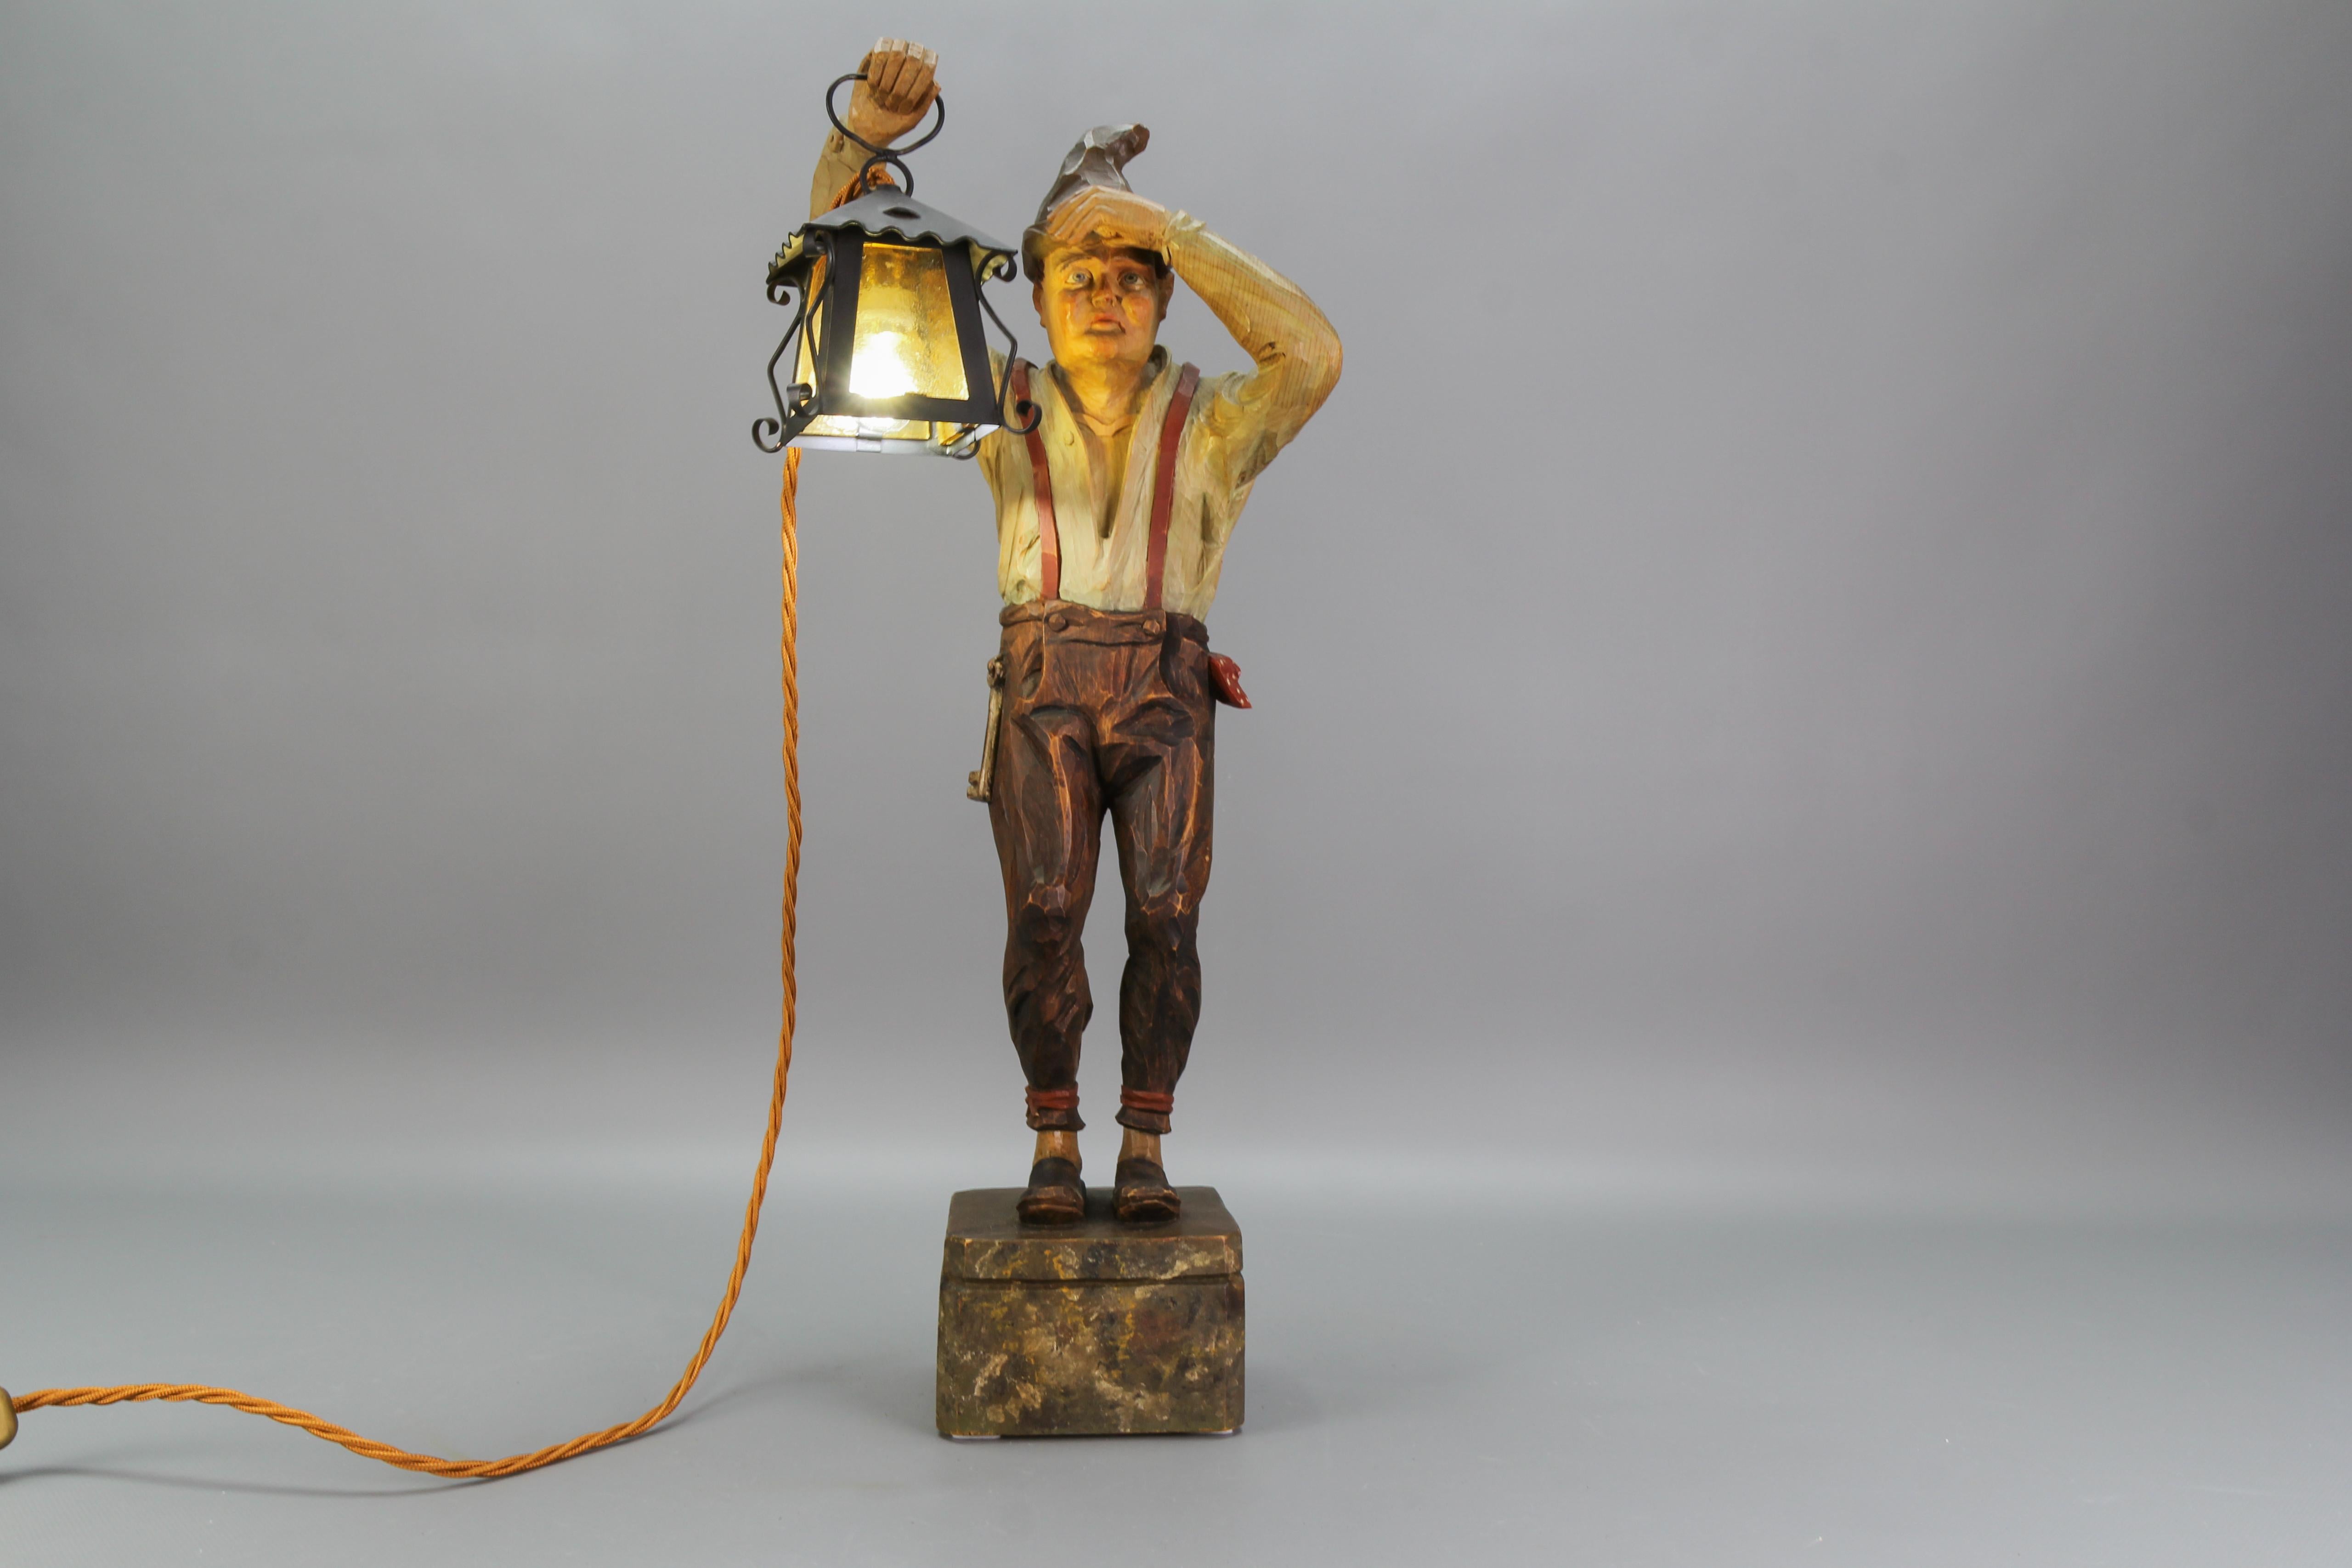 Large Hand-Carved Wooden Lamp Sculpture Man with a Lantern, Germany, 1930s For Sale 7